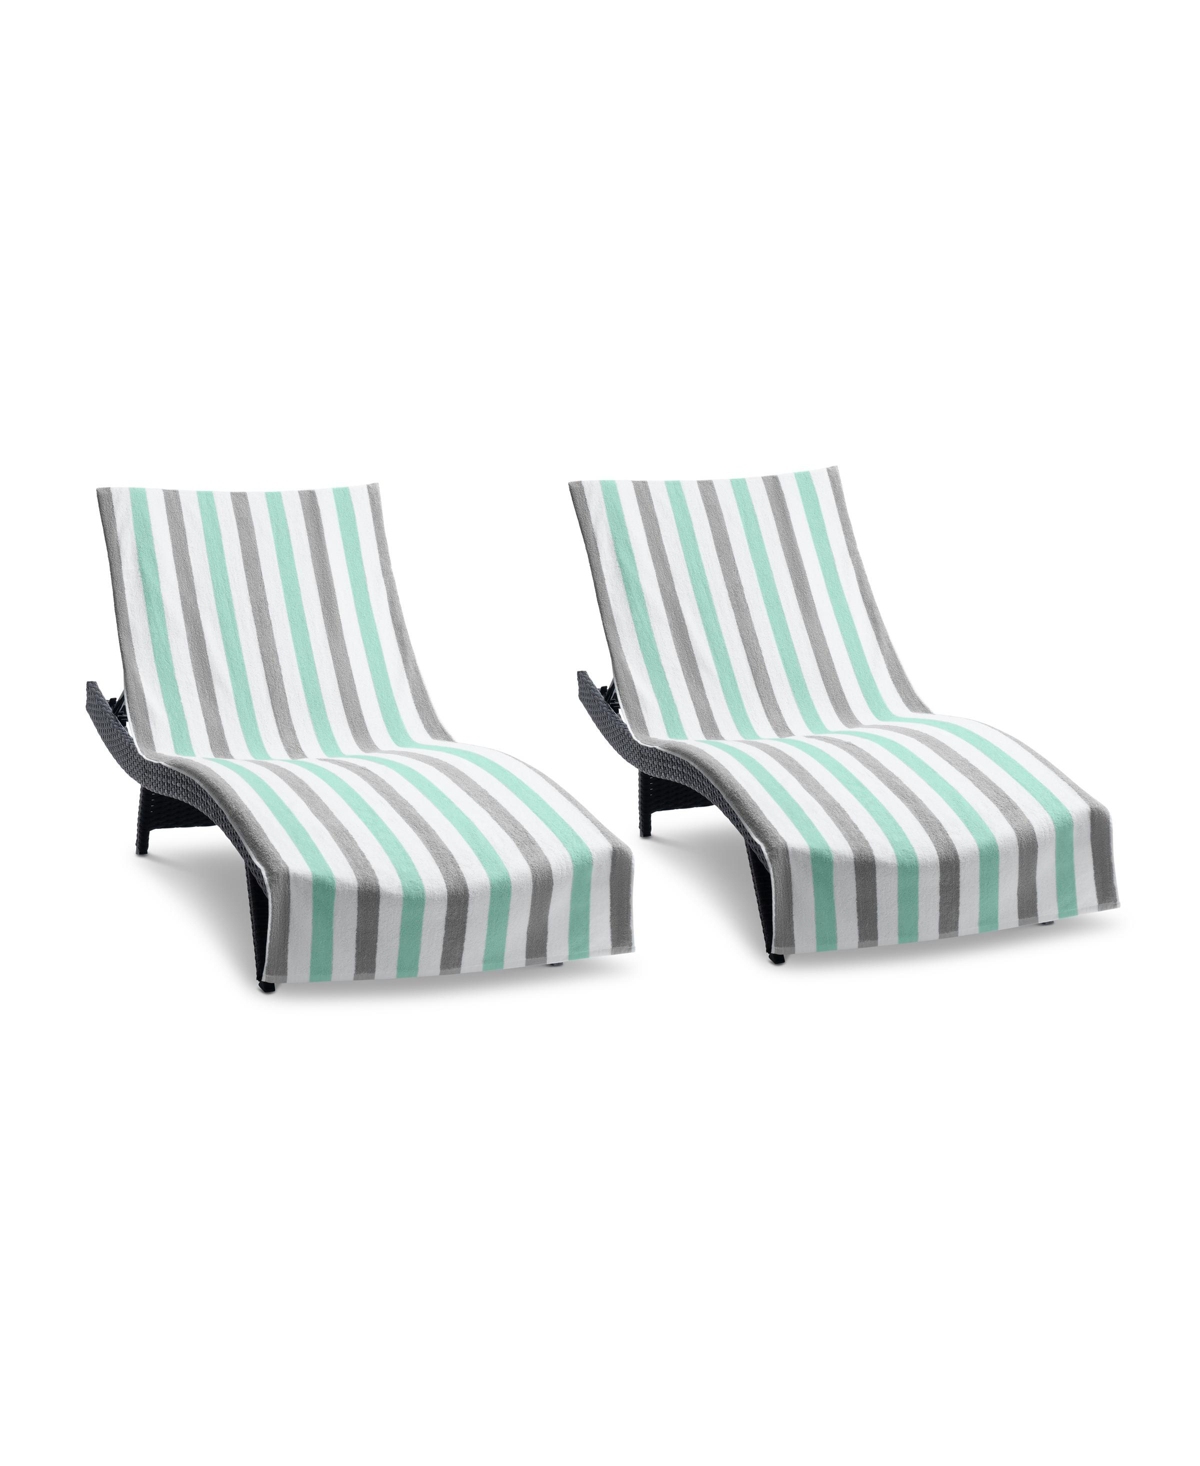 Cabo Cabana Chaise Lounge Chair Covers (2 Pack), Striped Color Options, Soft Cotton, 30x85 in. with 8" Fitted Pocked for Beach Chair -